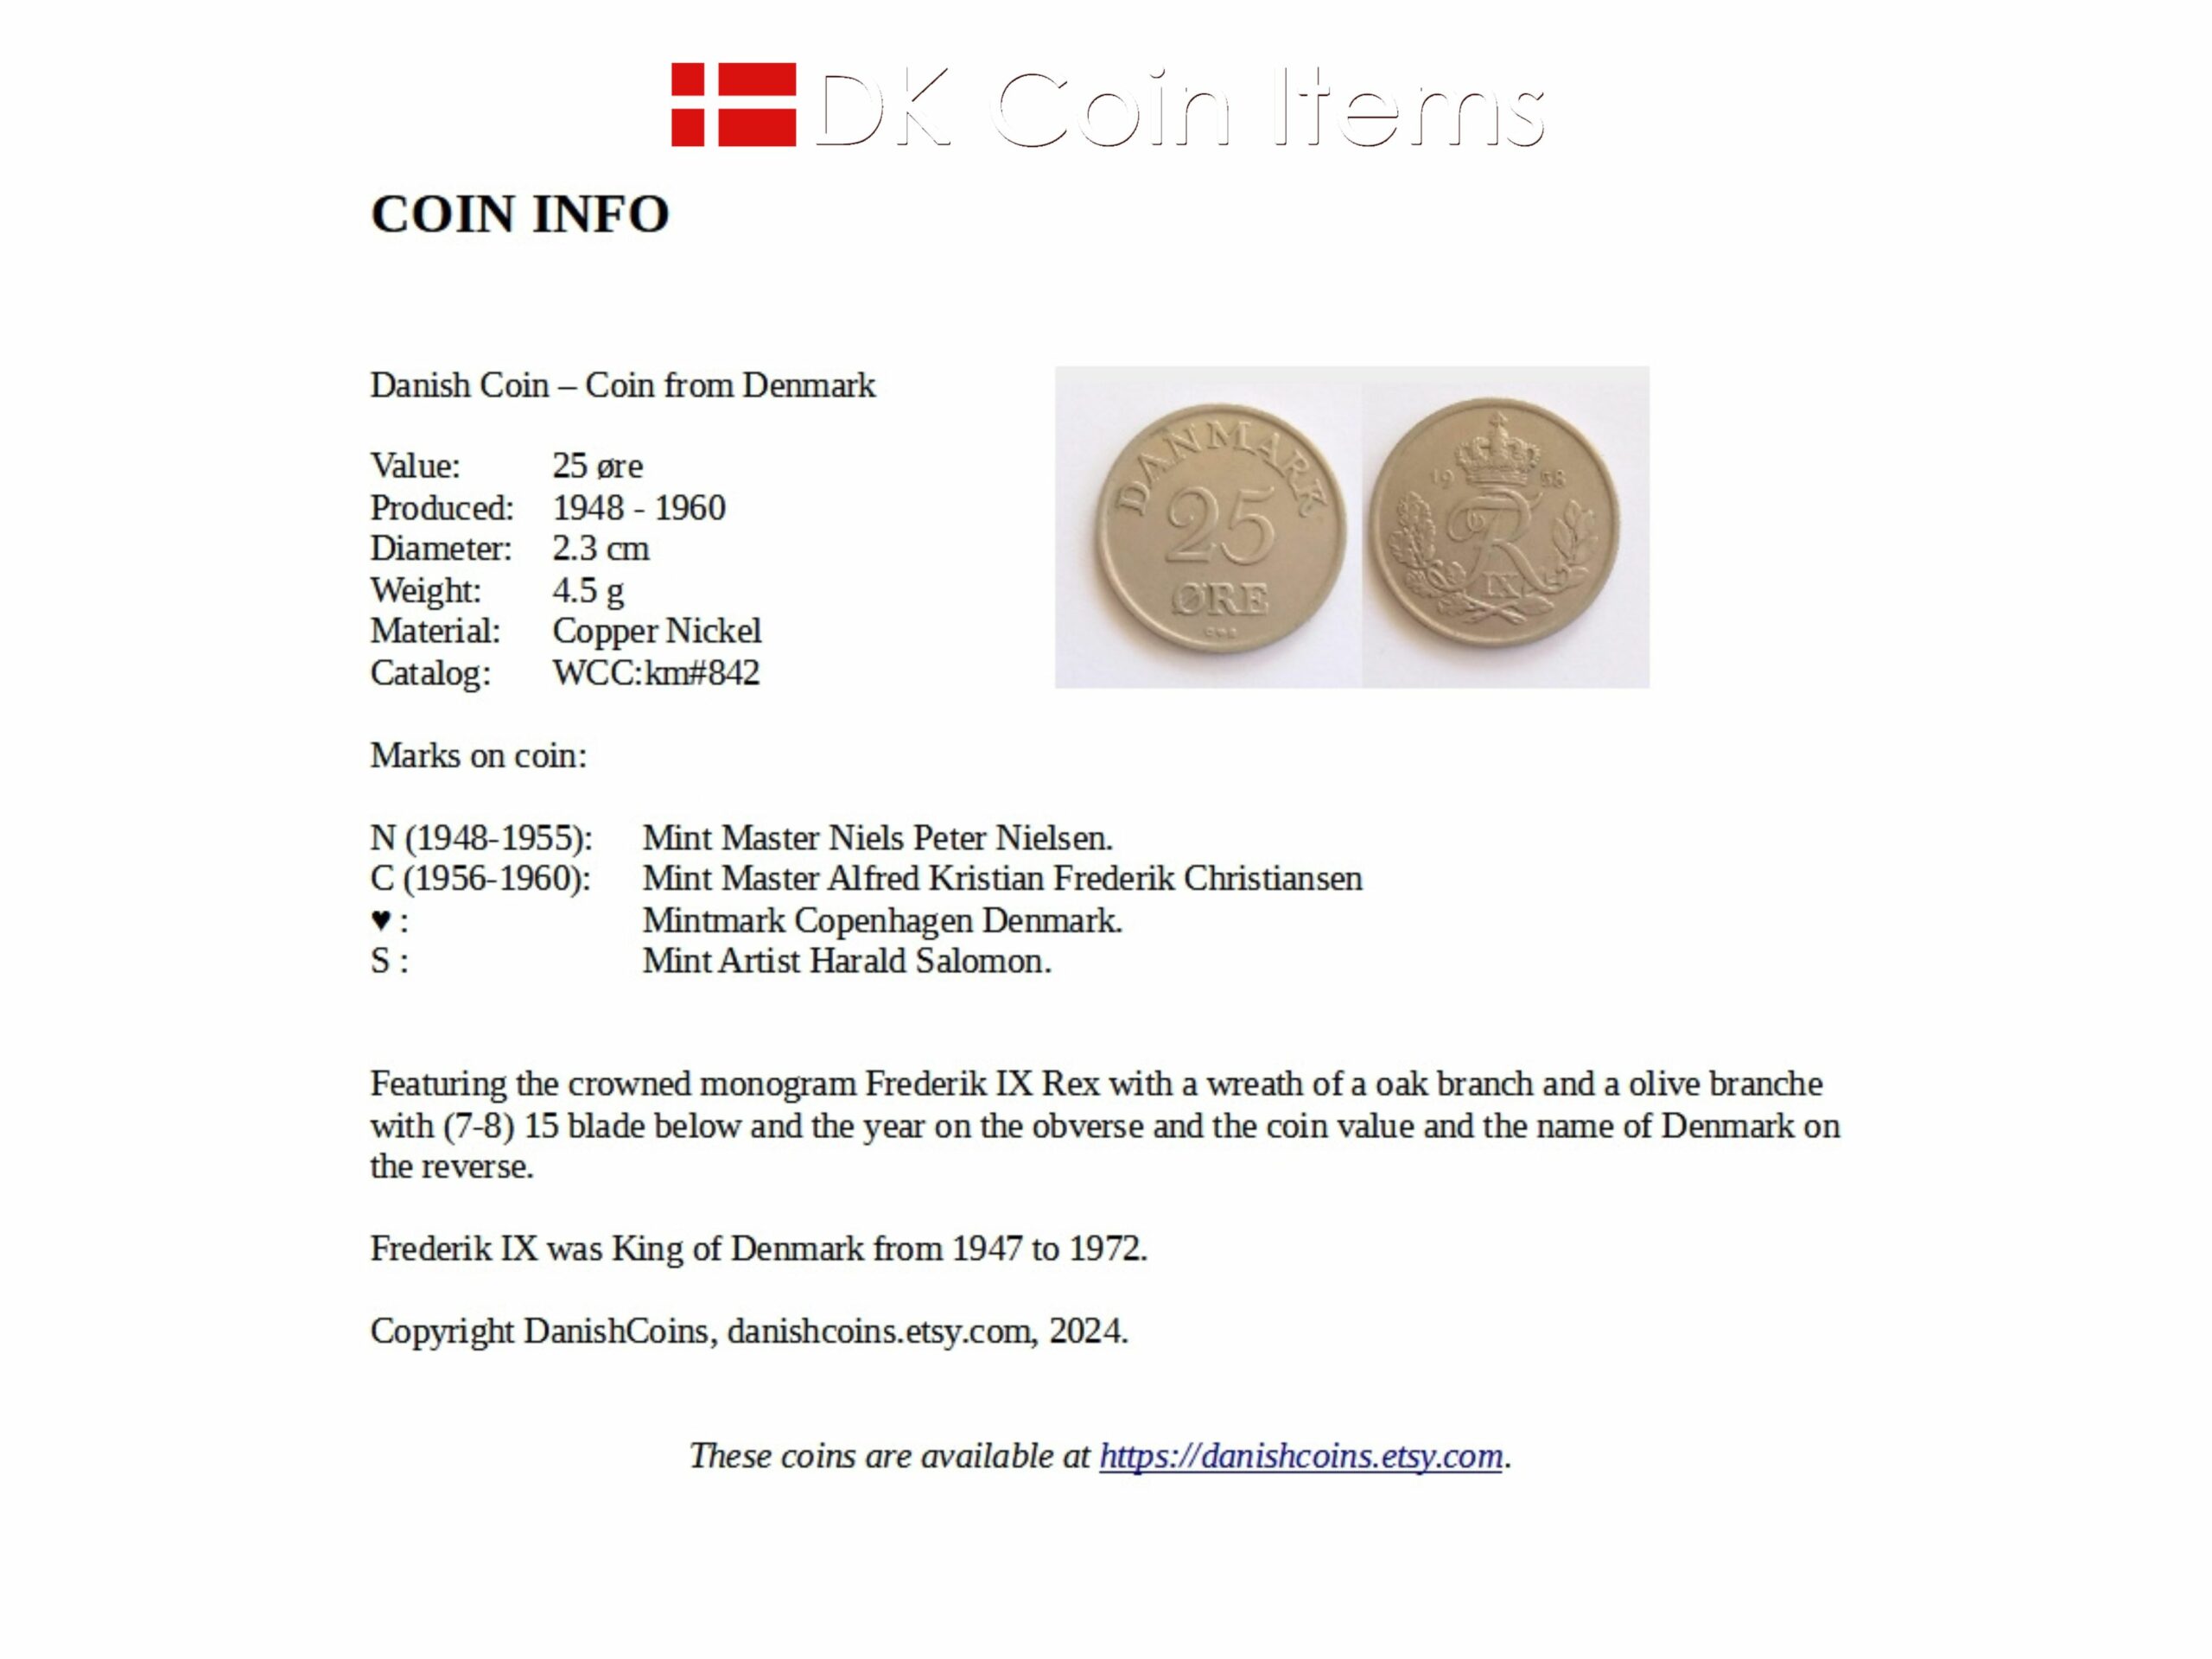 Bullion Exchanges | Buy Gold and Silver | Free Shipping